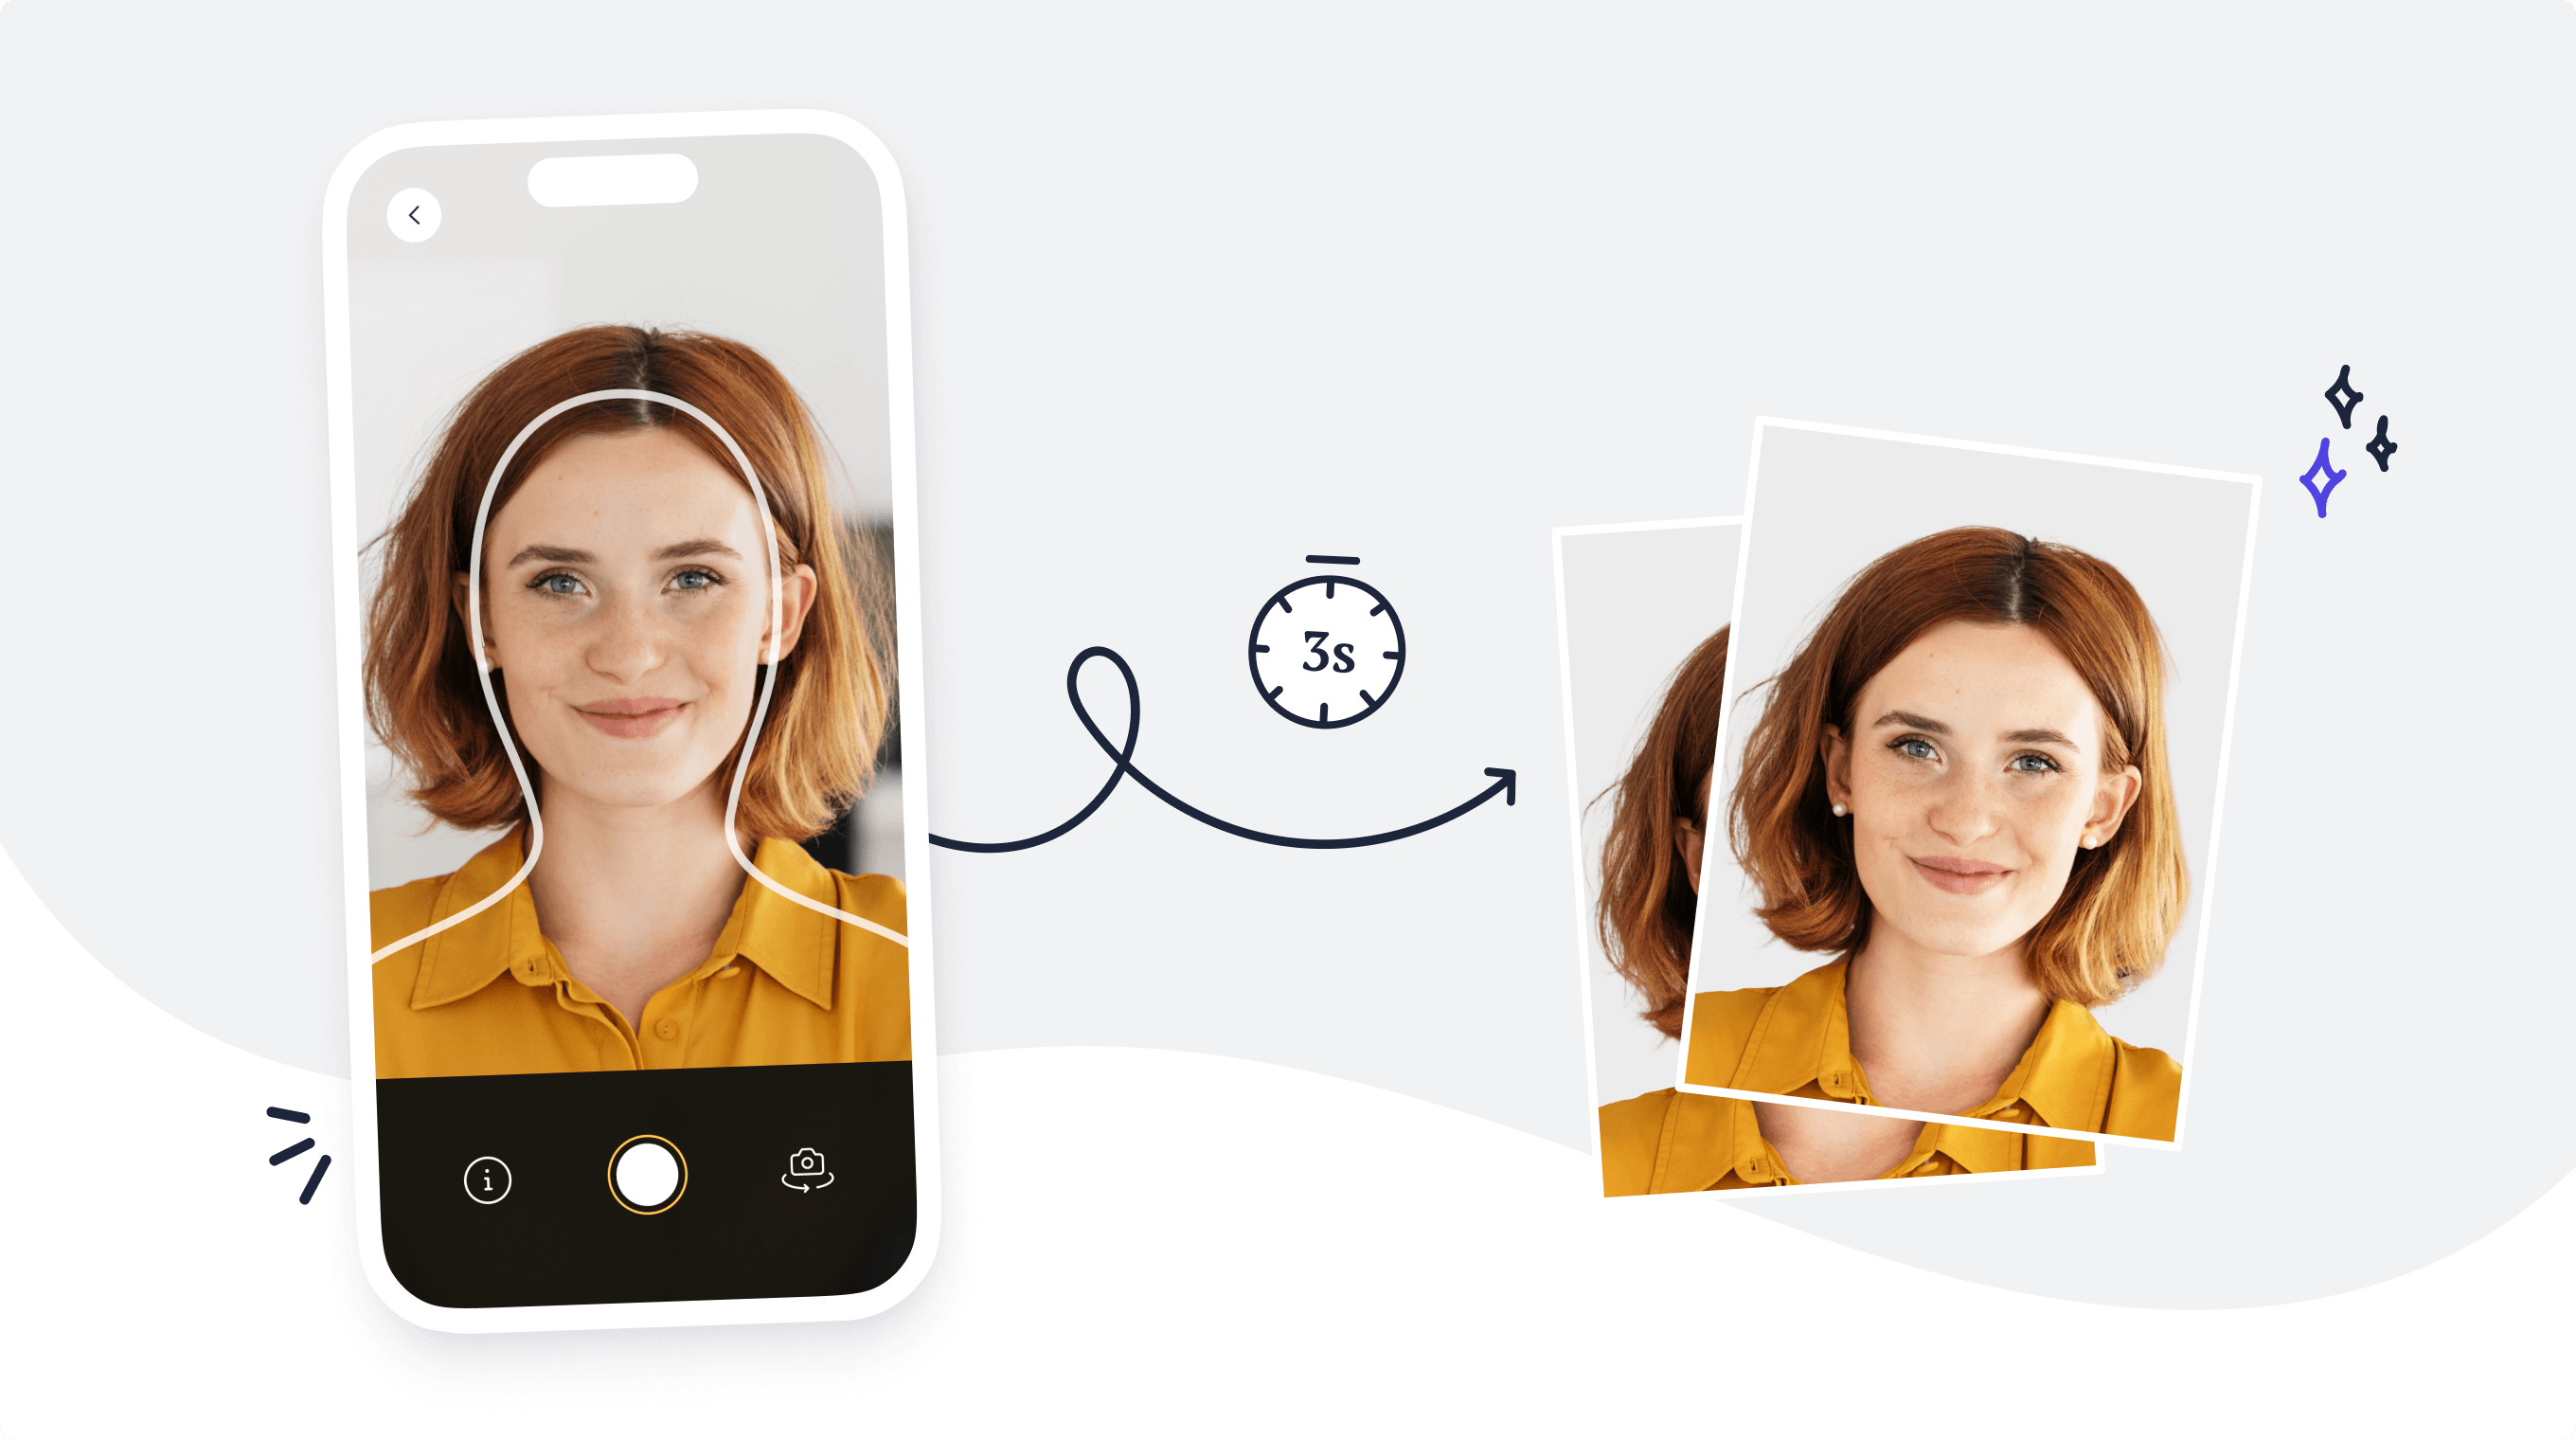 A picture converted into a government-compliant passport photo in 3 seconds using the Passport Photo Online mobile app.